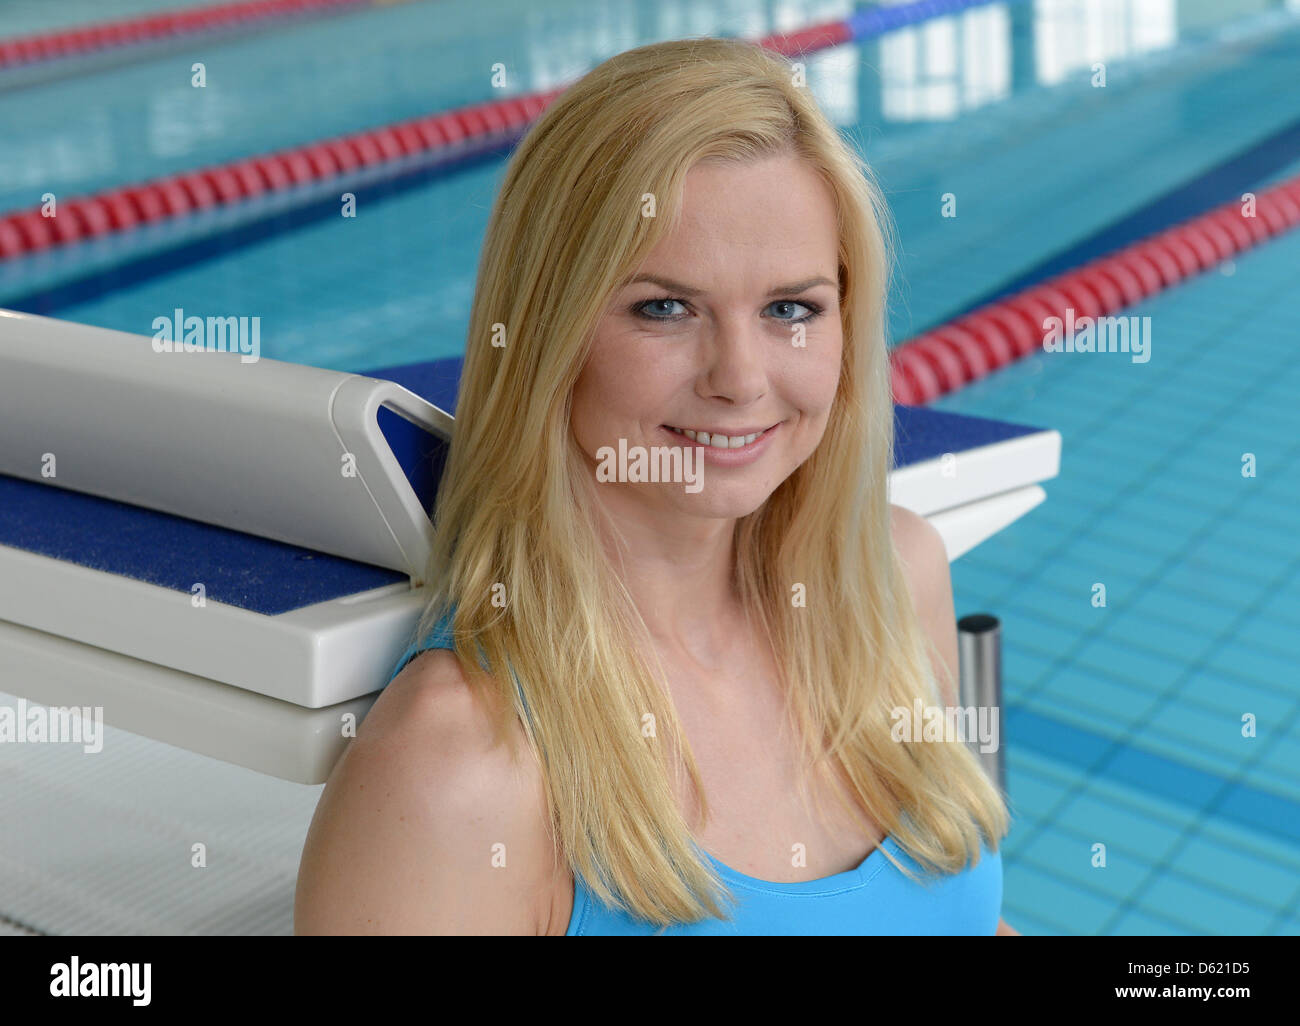 German Swimmer Britta Steffen Poses For The Cameras In Berlin Germany 25 April 2012 Steffen